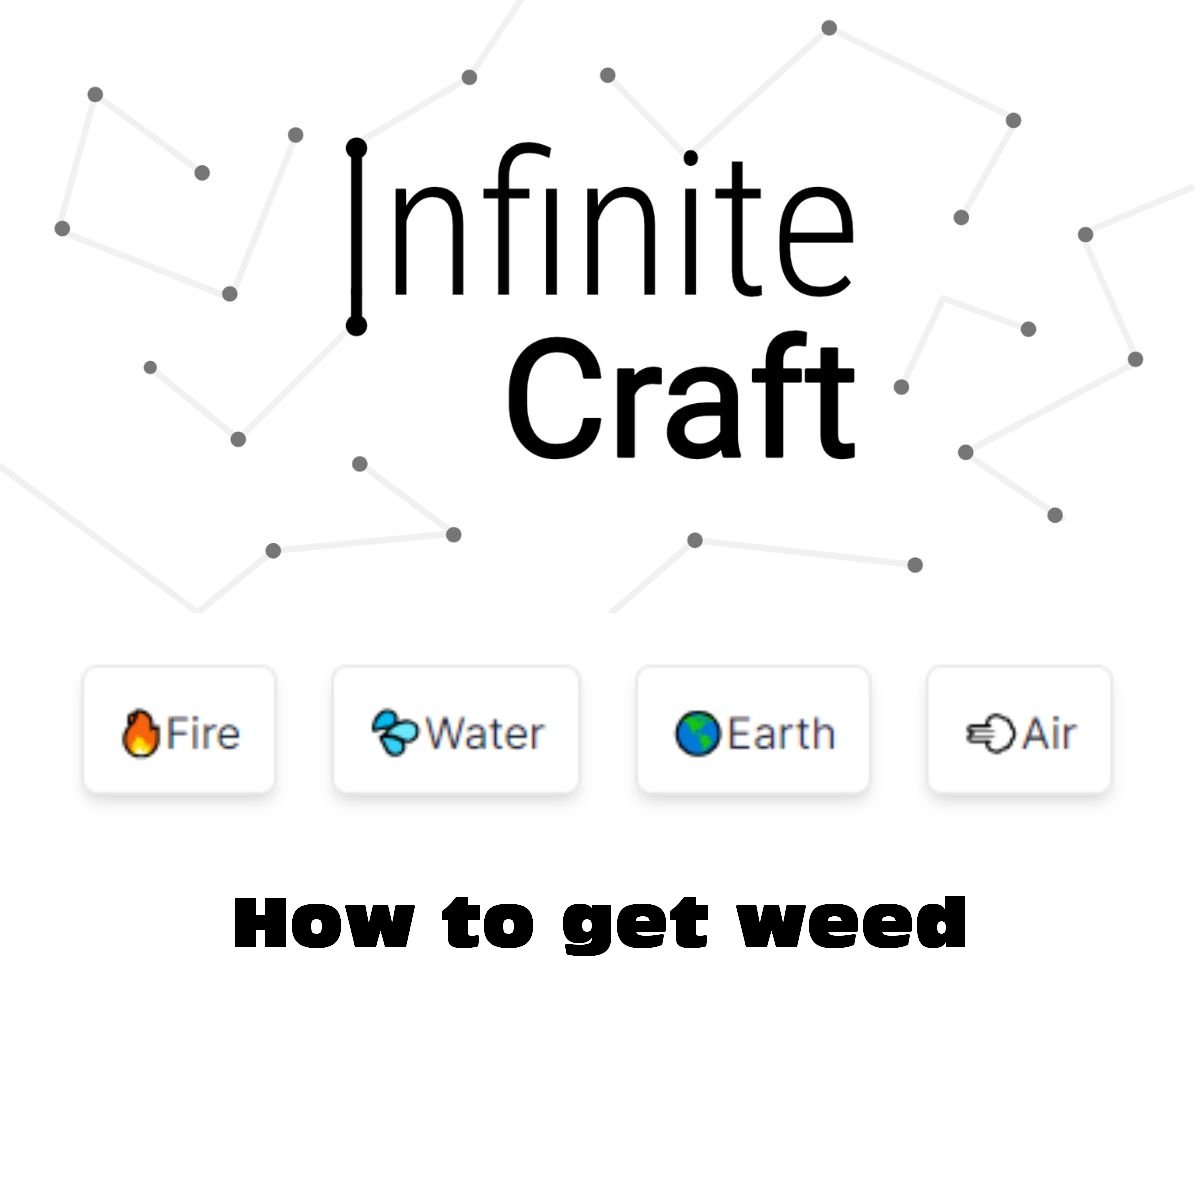 how to get weed in infinite craft